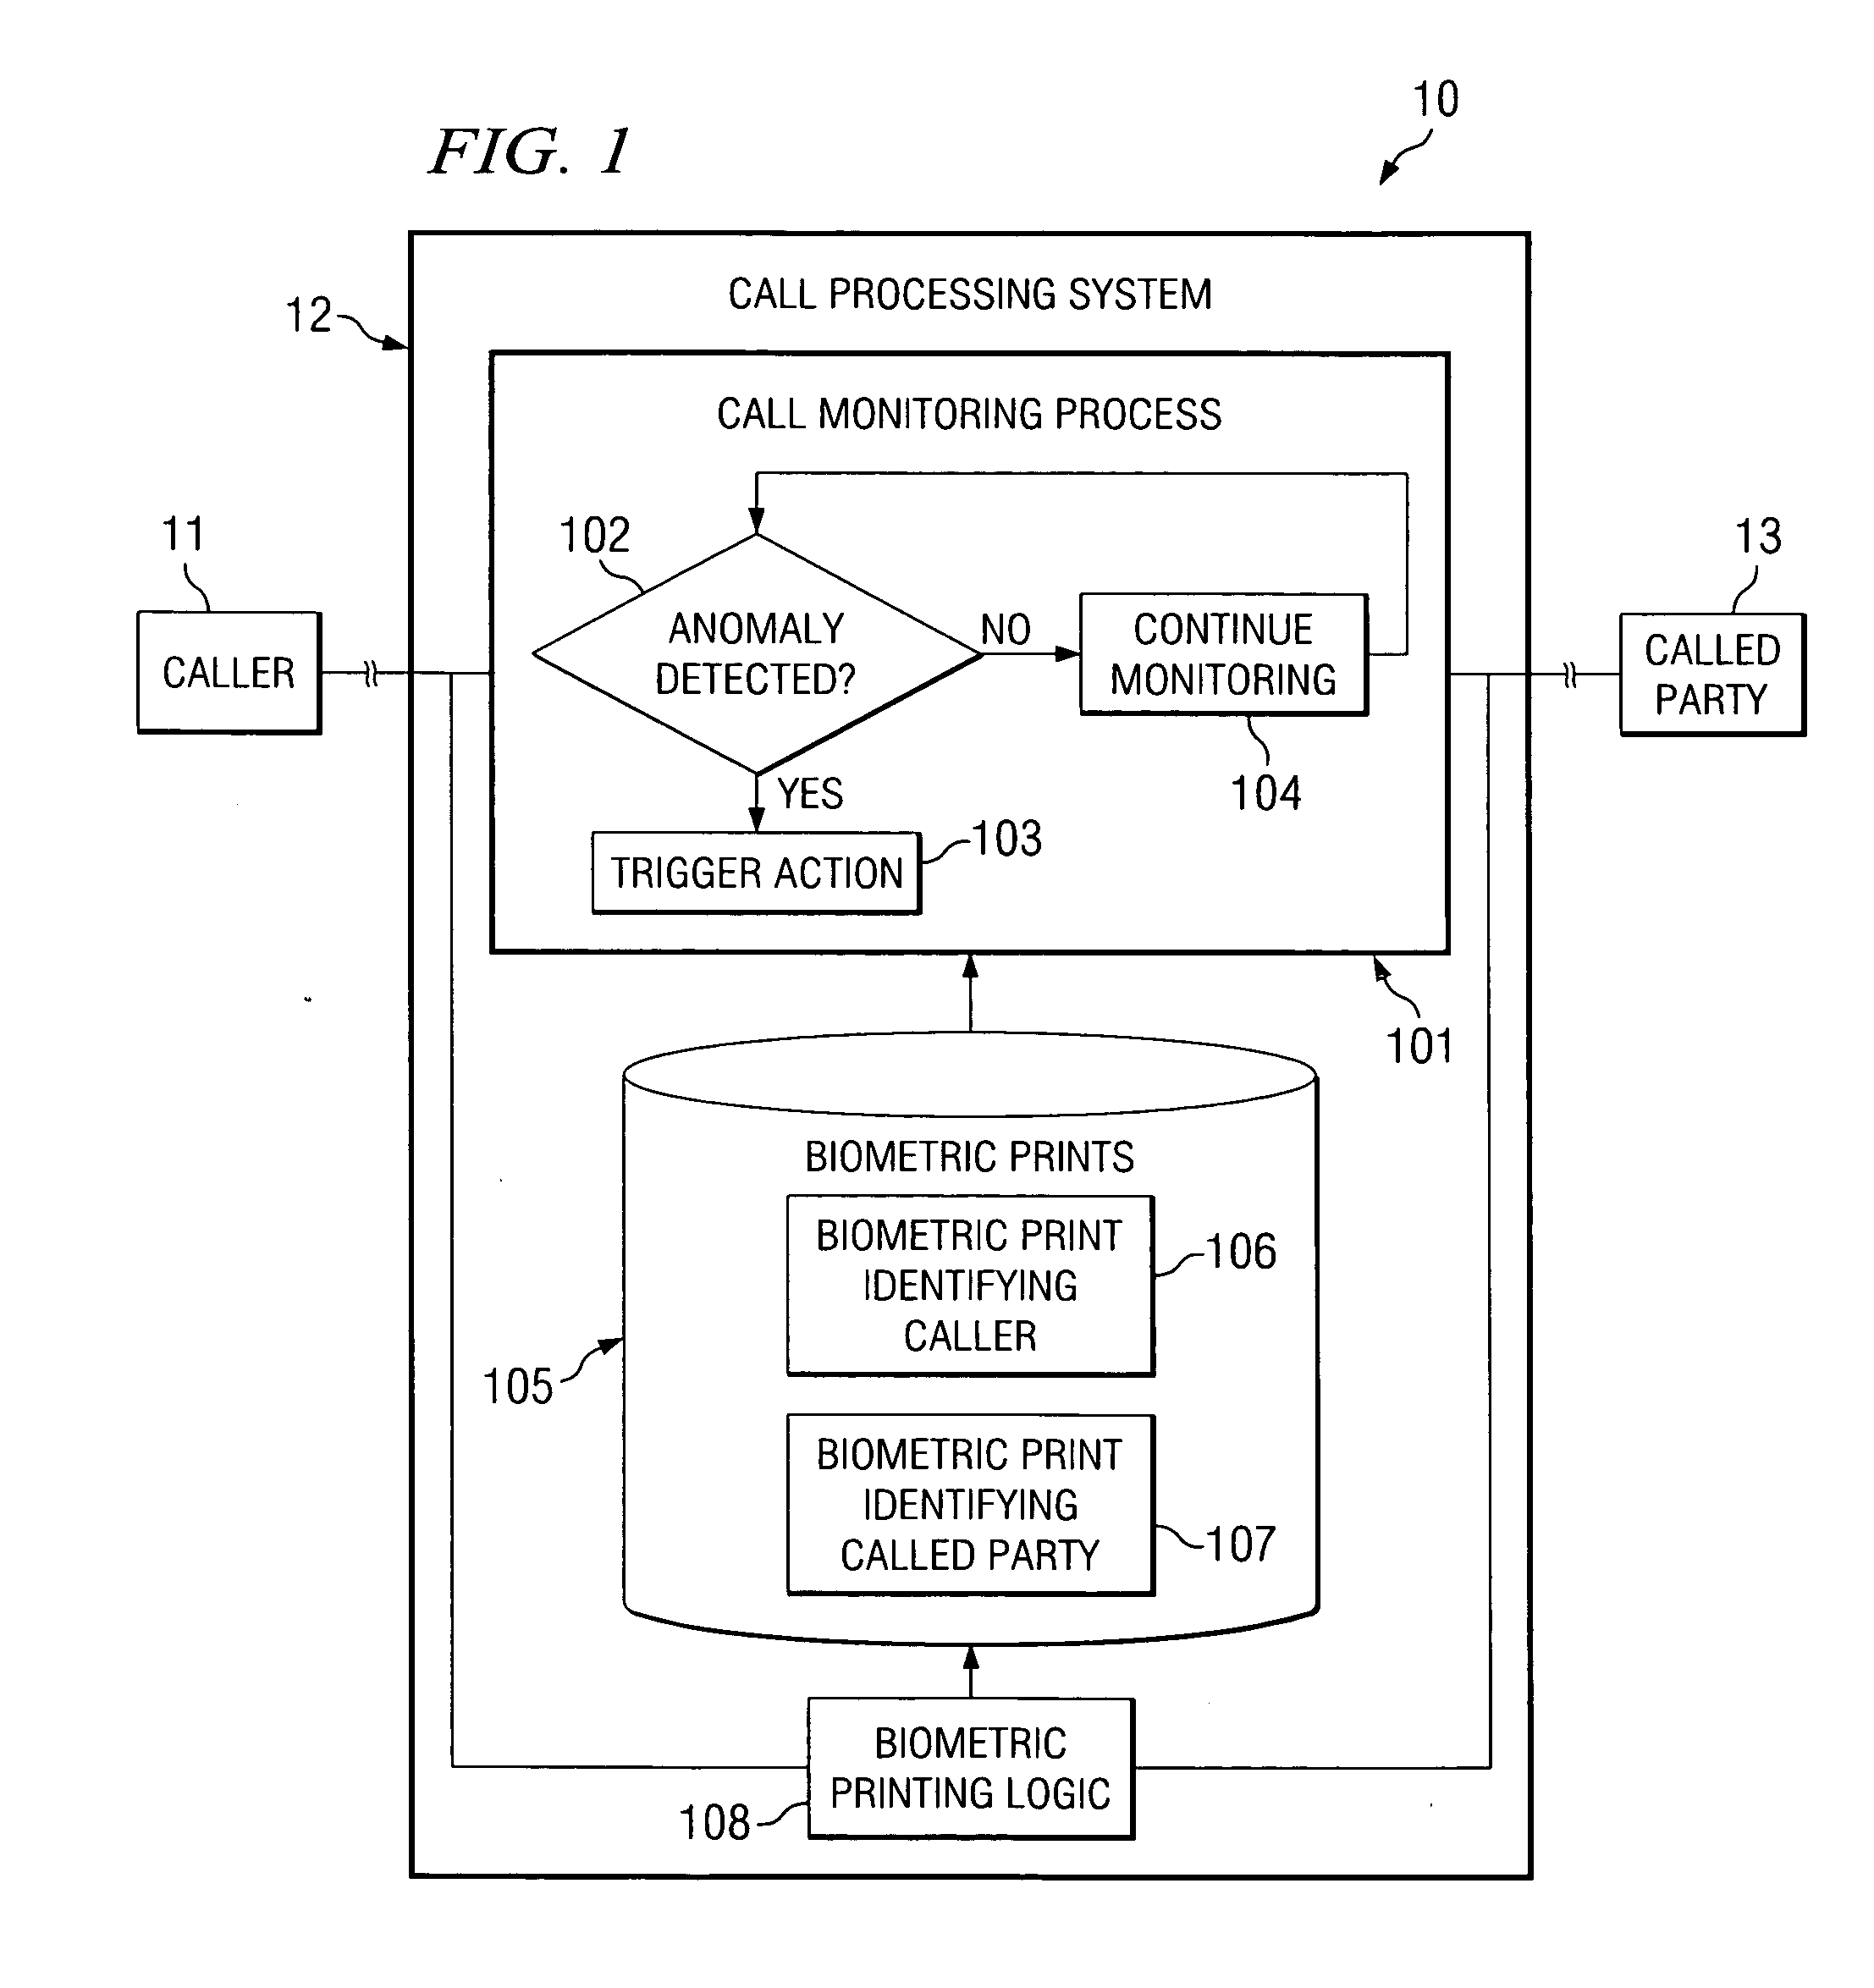 Systems and methods for detecting a call anomaly using biometric identification